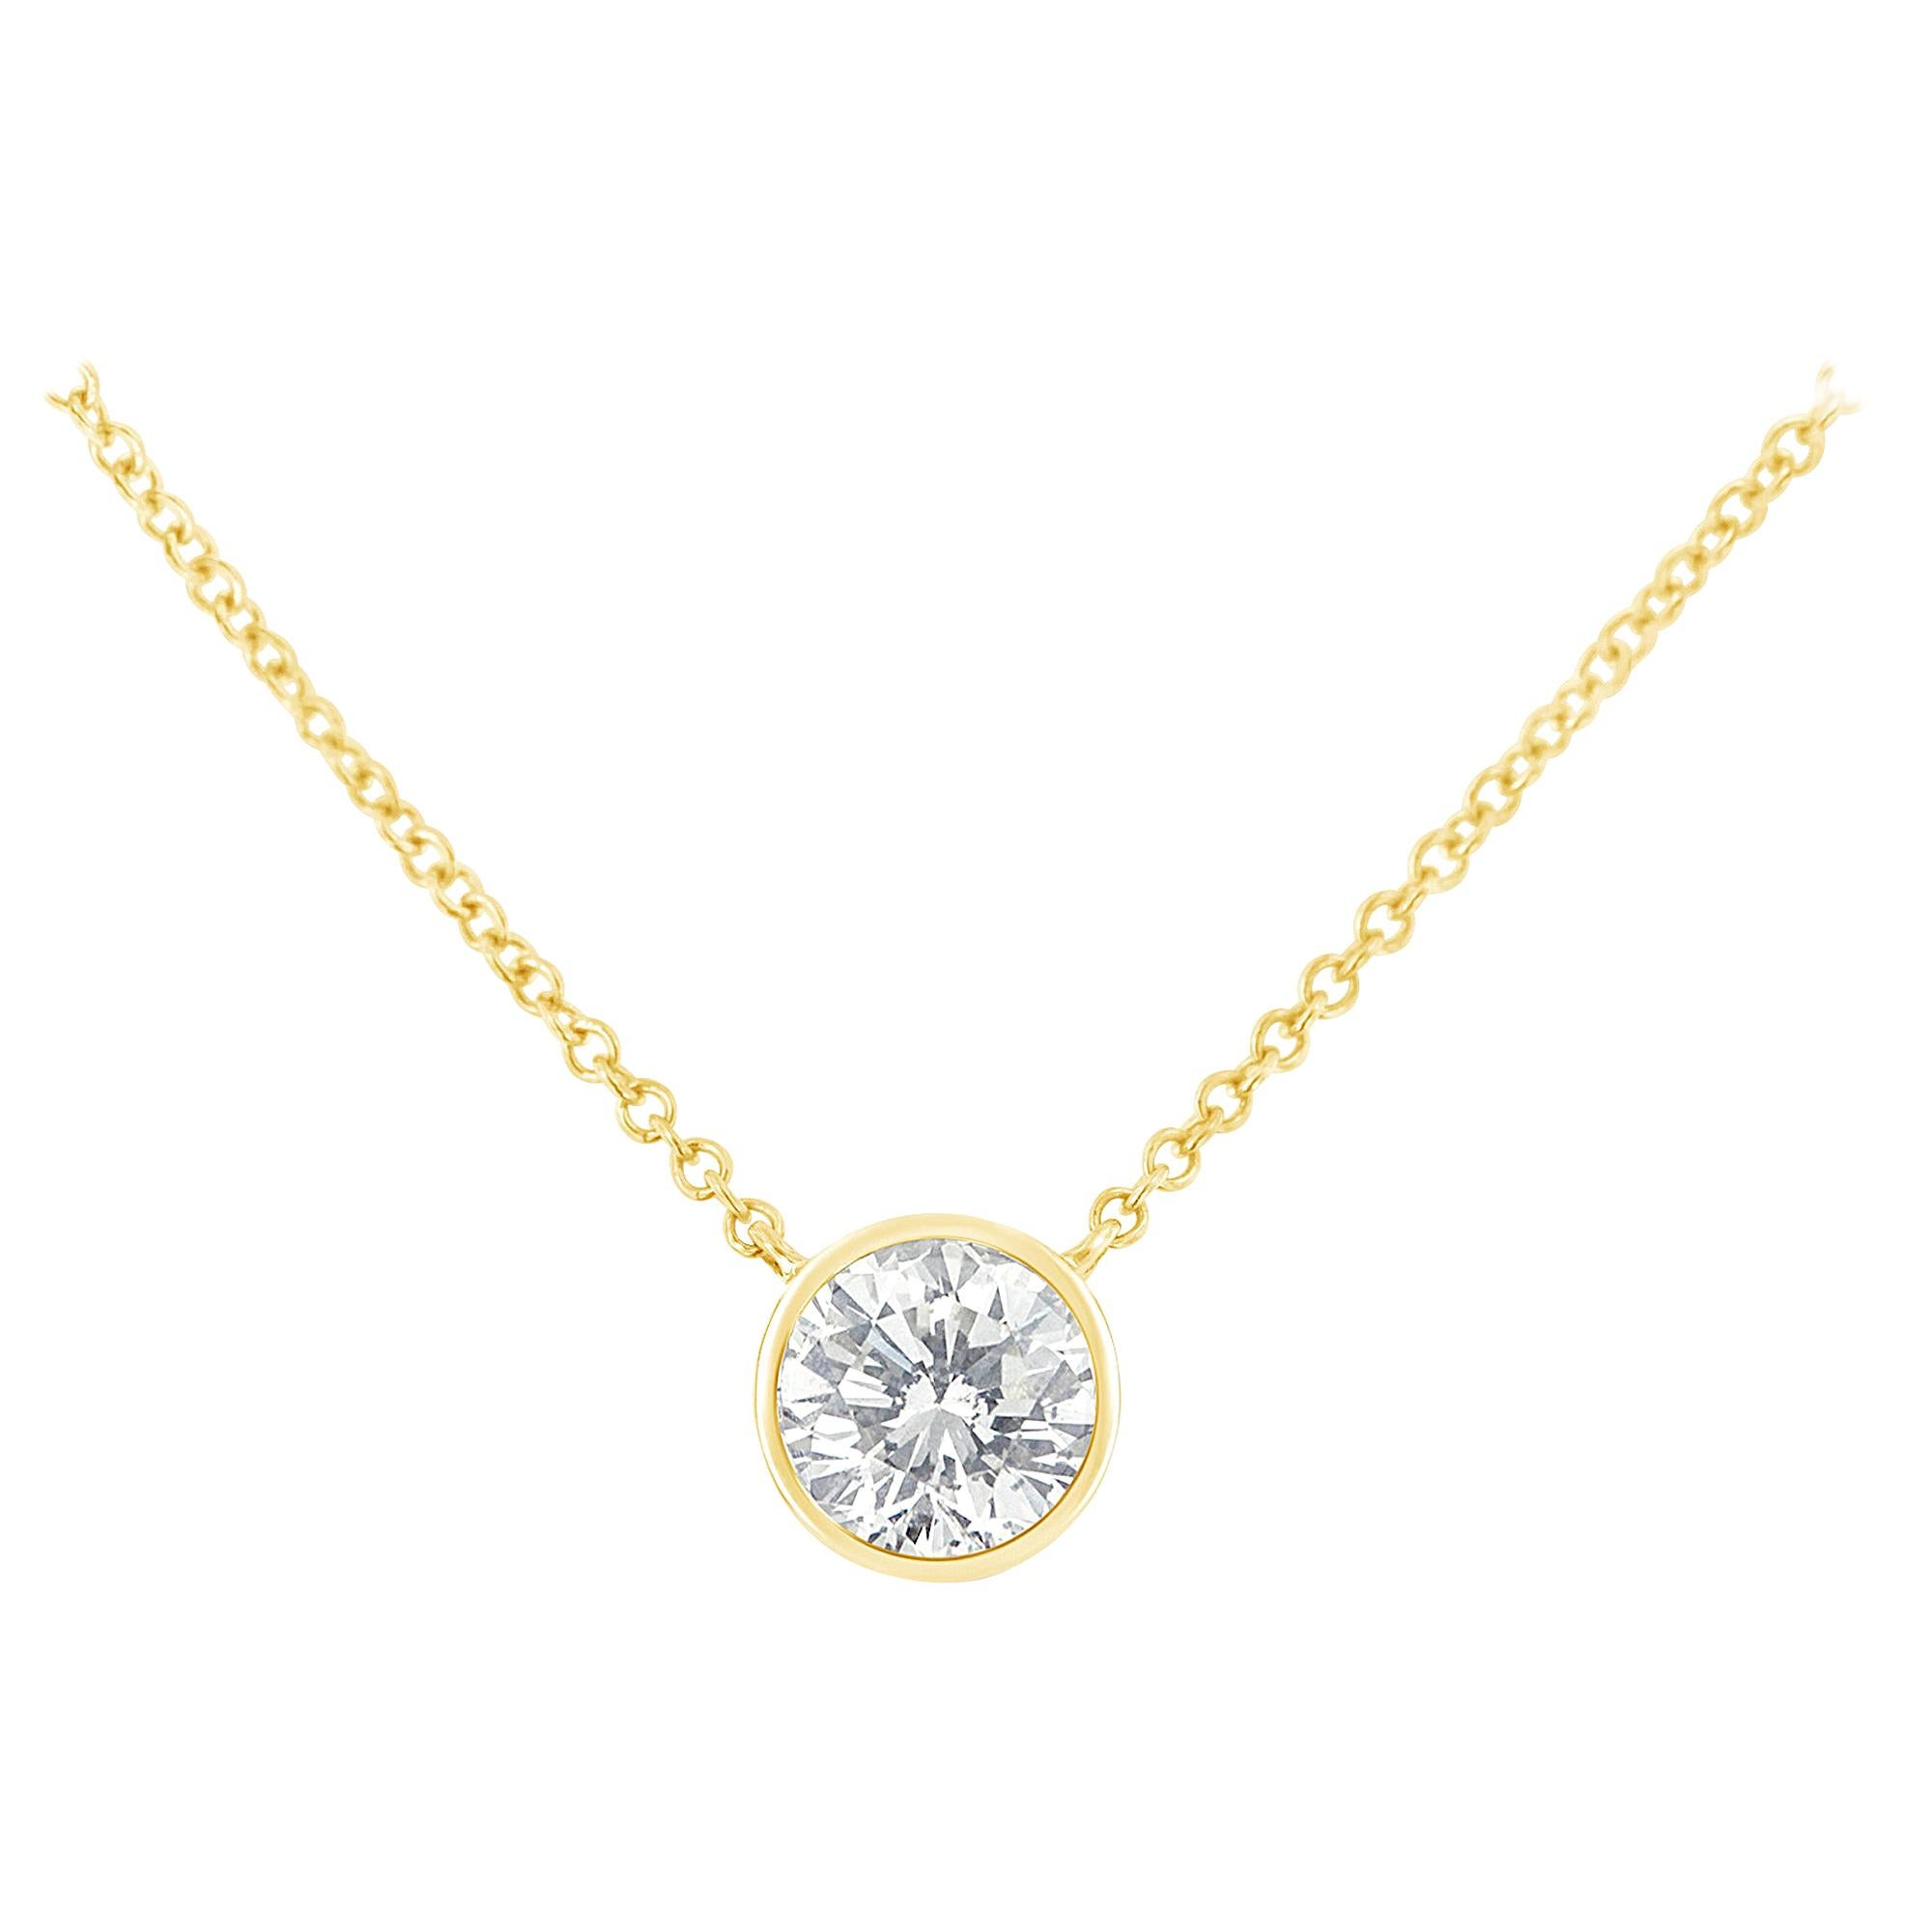 AGS Certified 10k Yellow Gold 1/10ct Diamond Solitaire Pendant Necklace For Sale